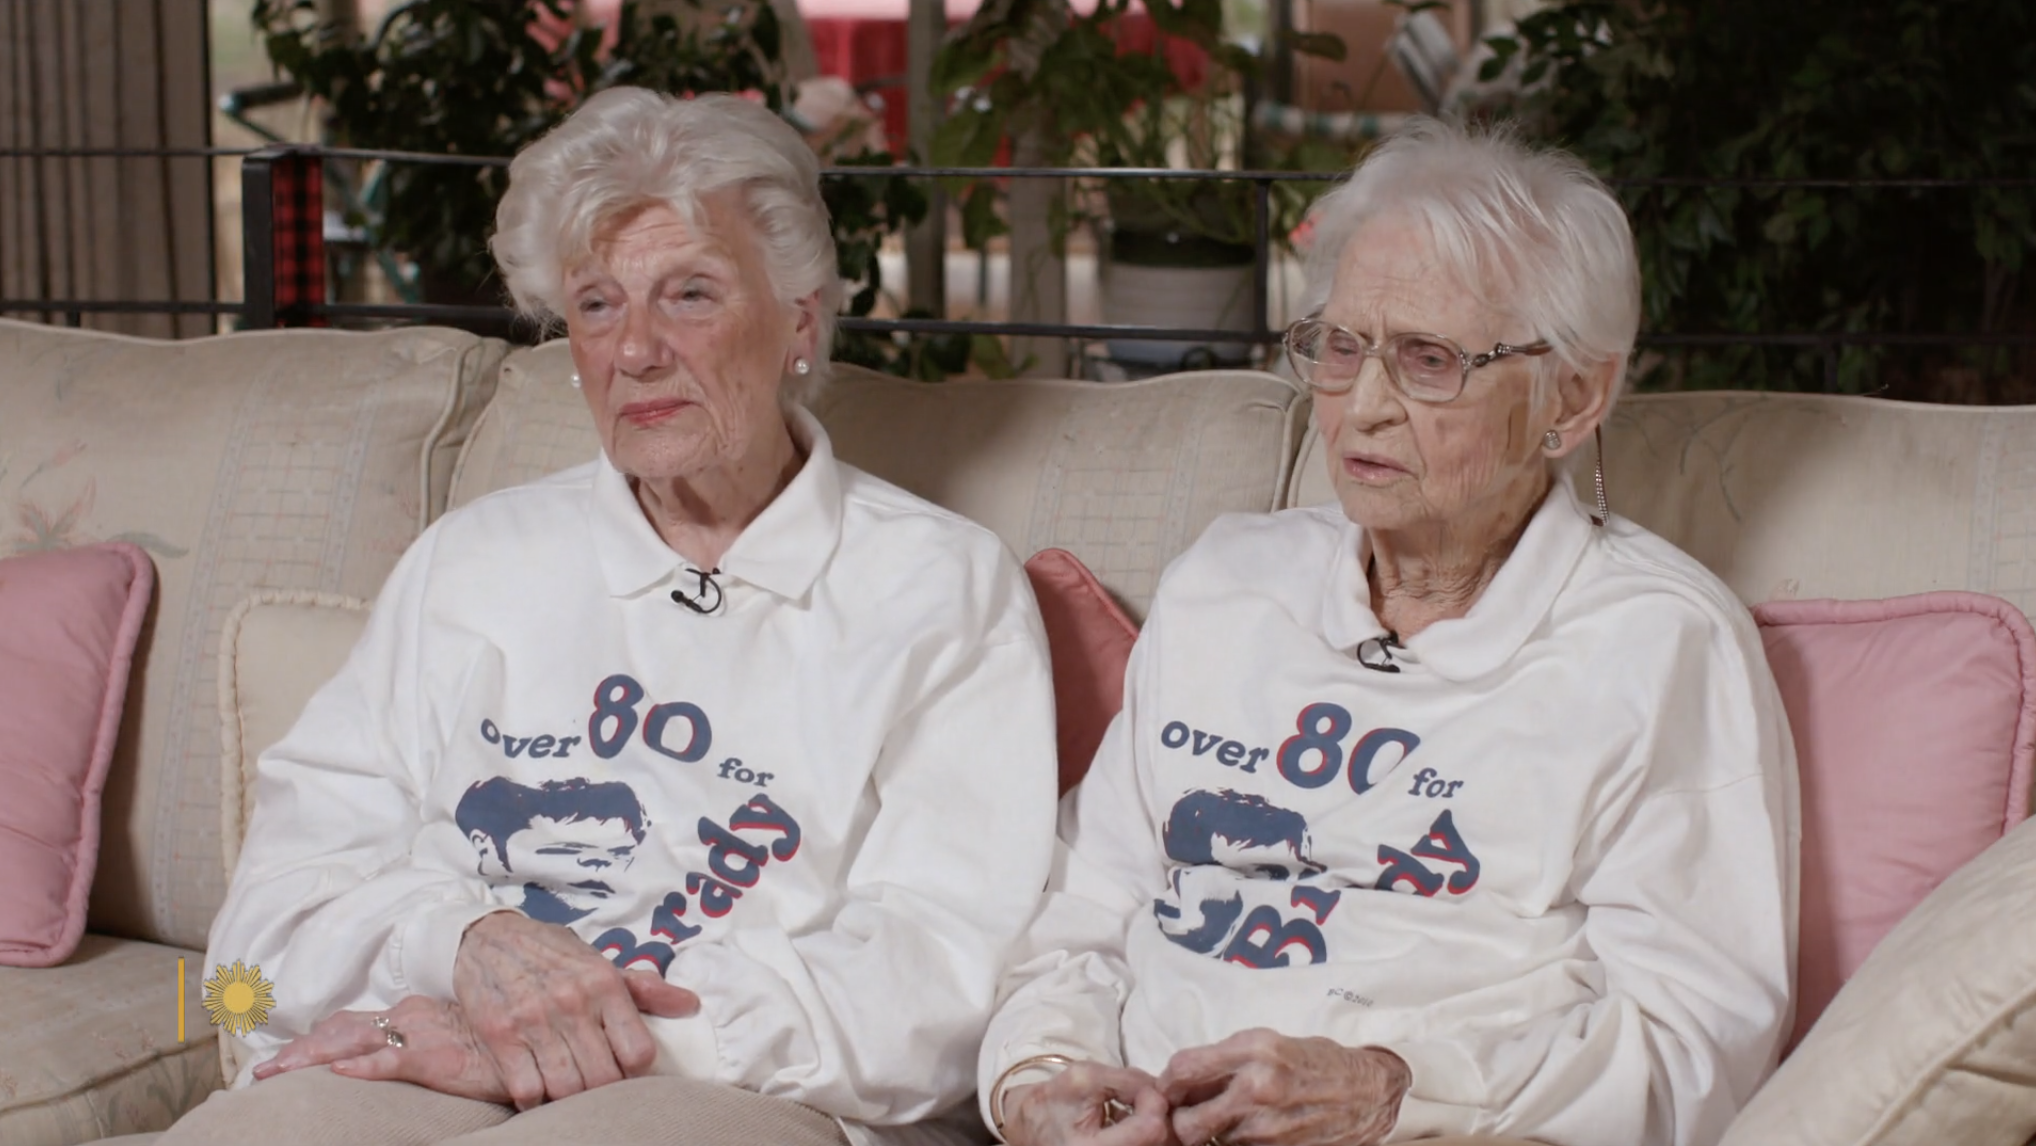 The women of the Over 80 for Brady Club